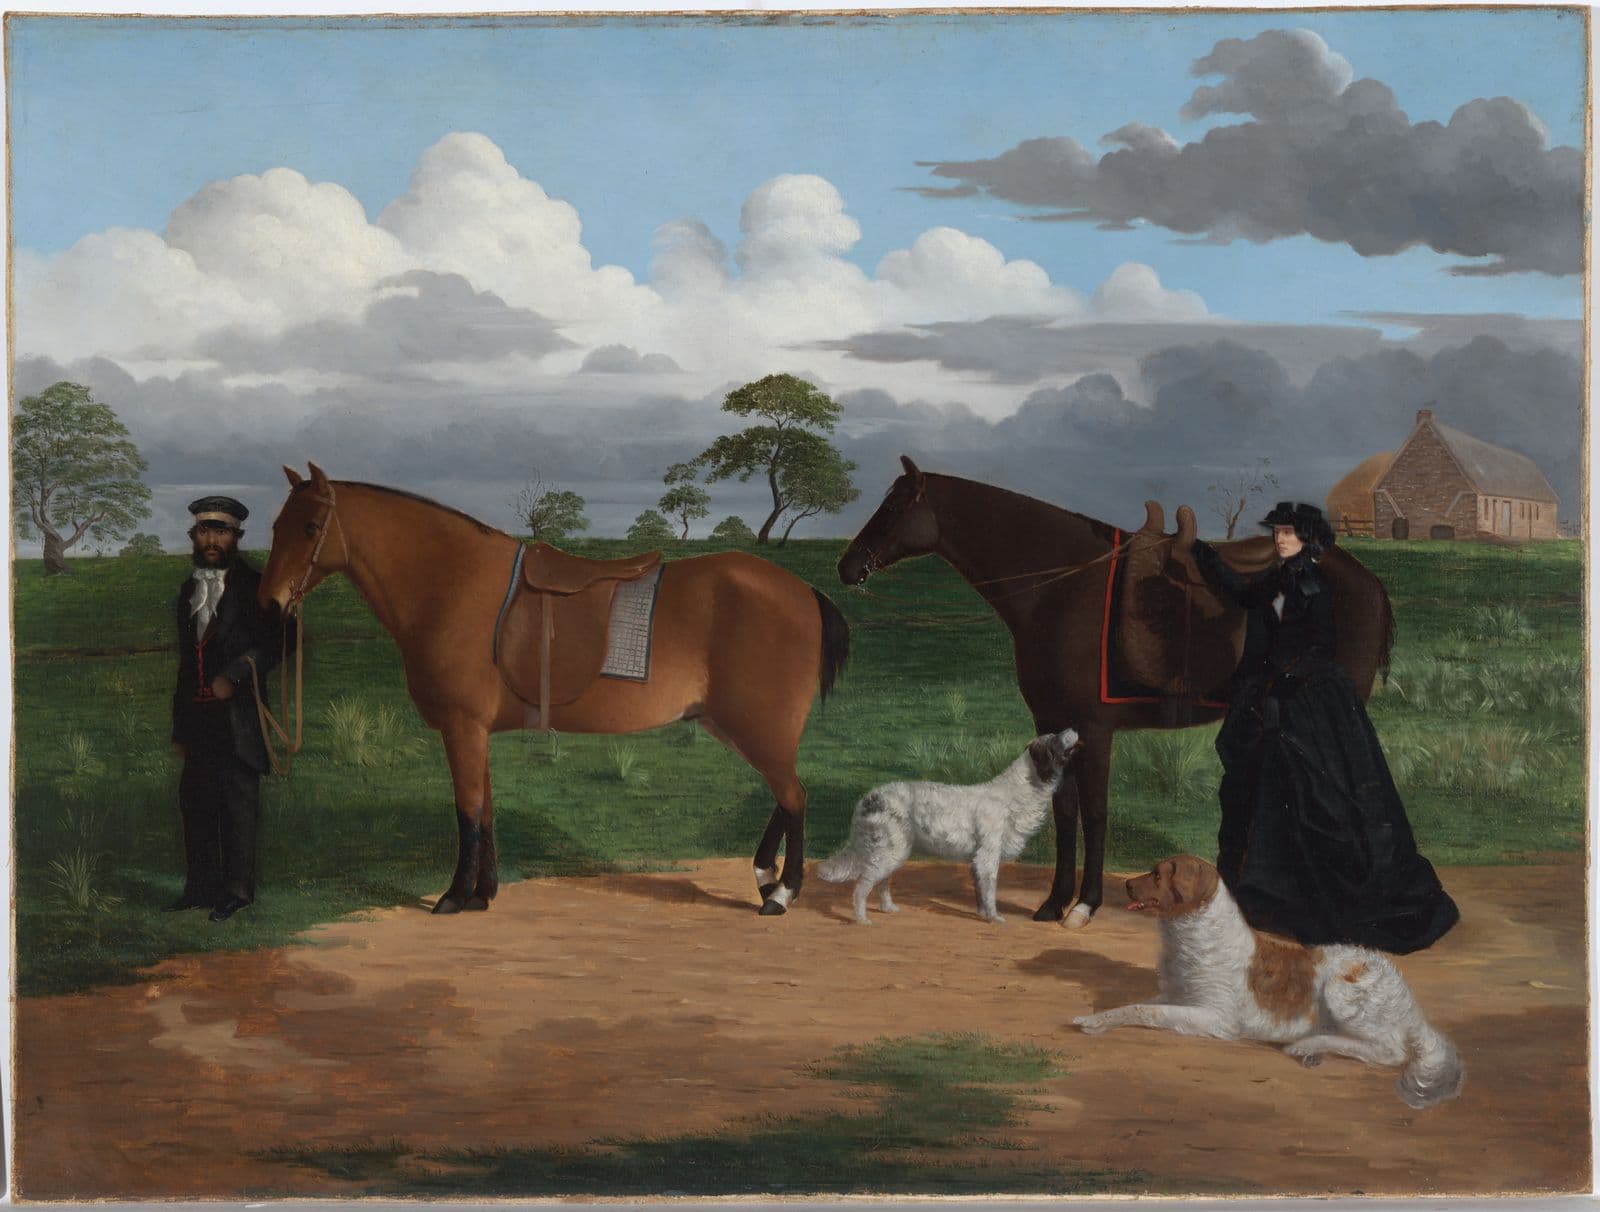 Two horses, one dark brown and one light brown. The horses' reigns are held by a woman and a man. Two dogs sit near the dark brown horse